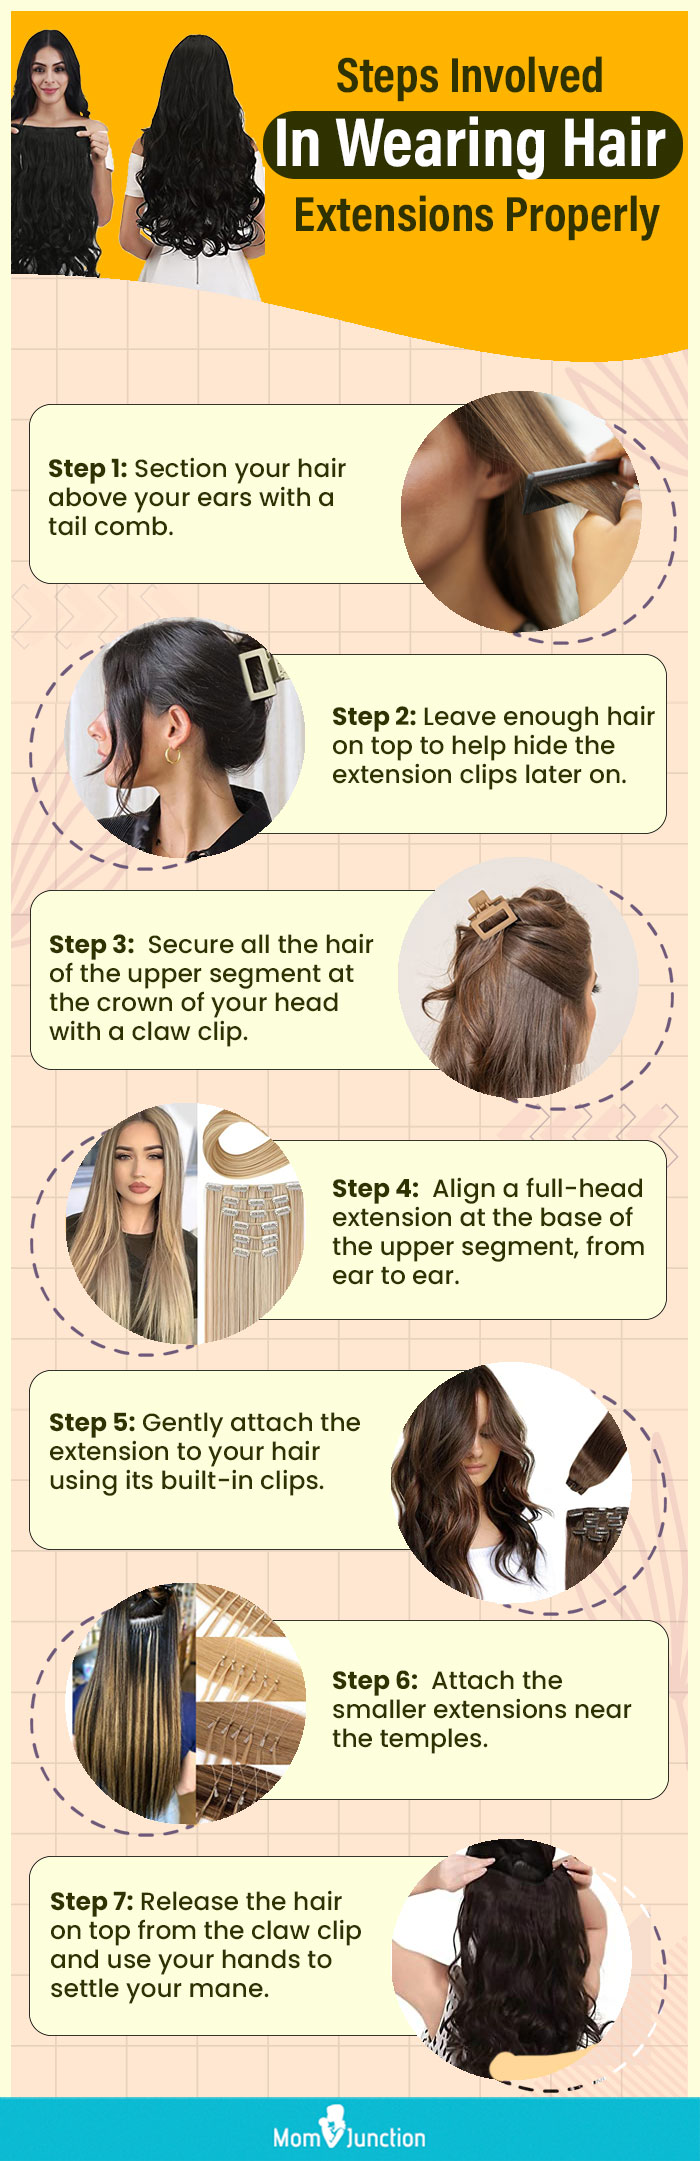 Steps Involved In Wearing Hair Extensions Properly (infographic)